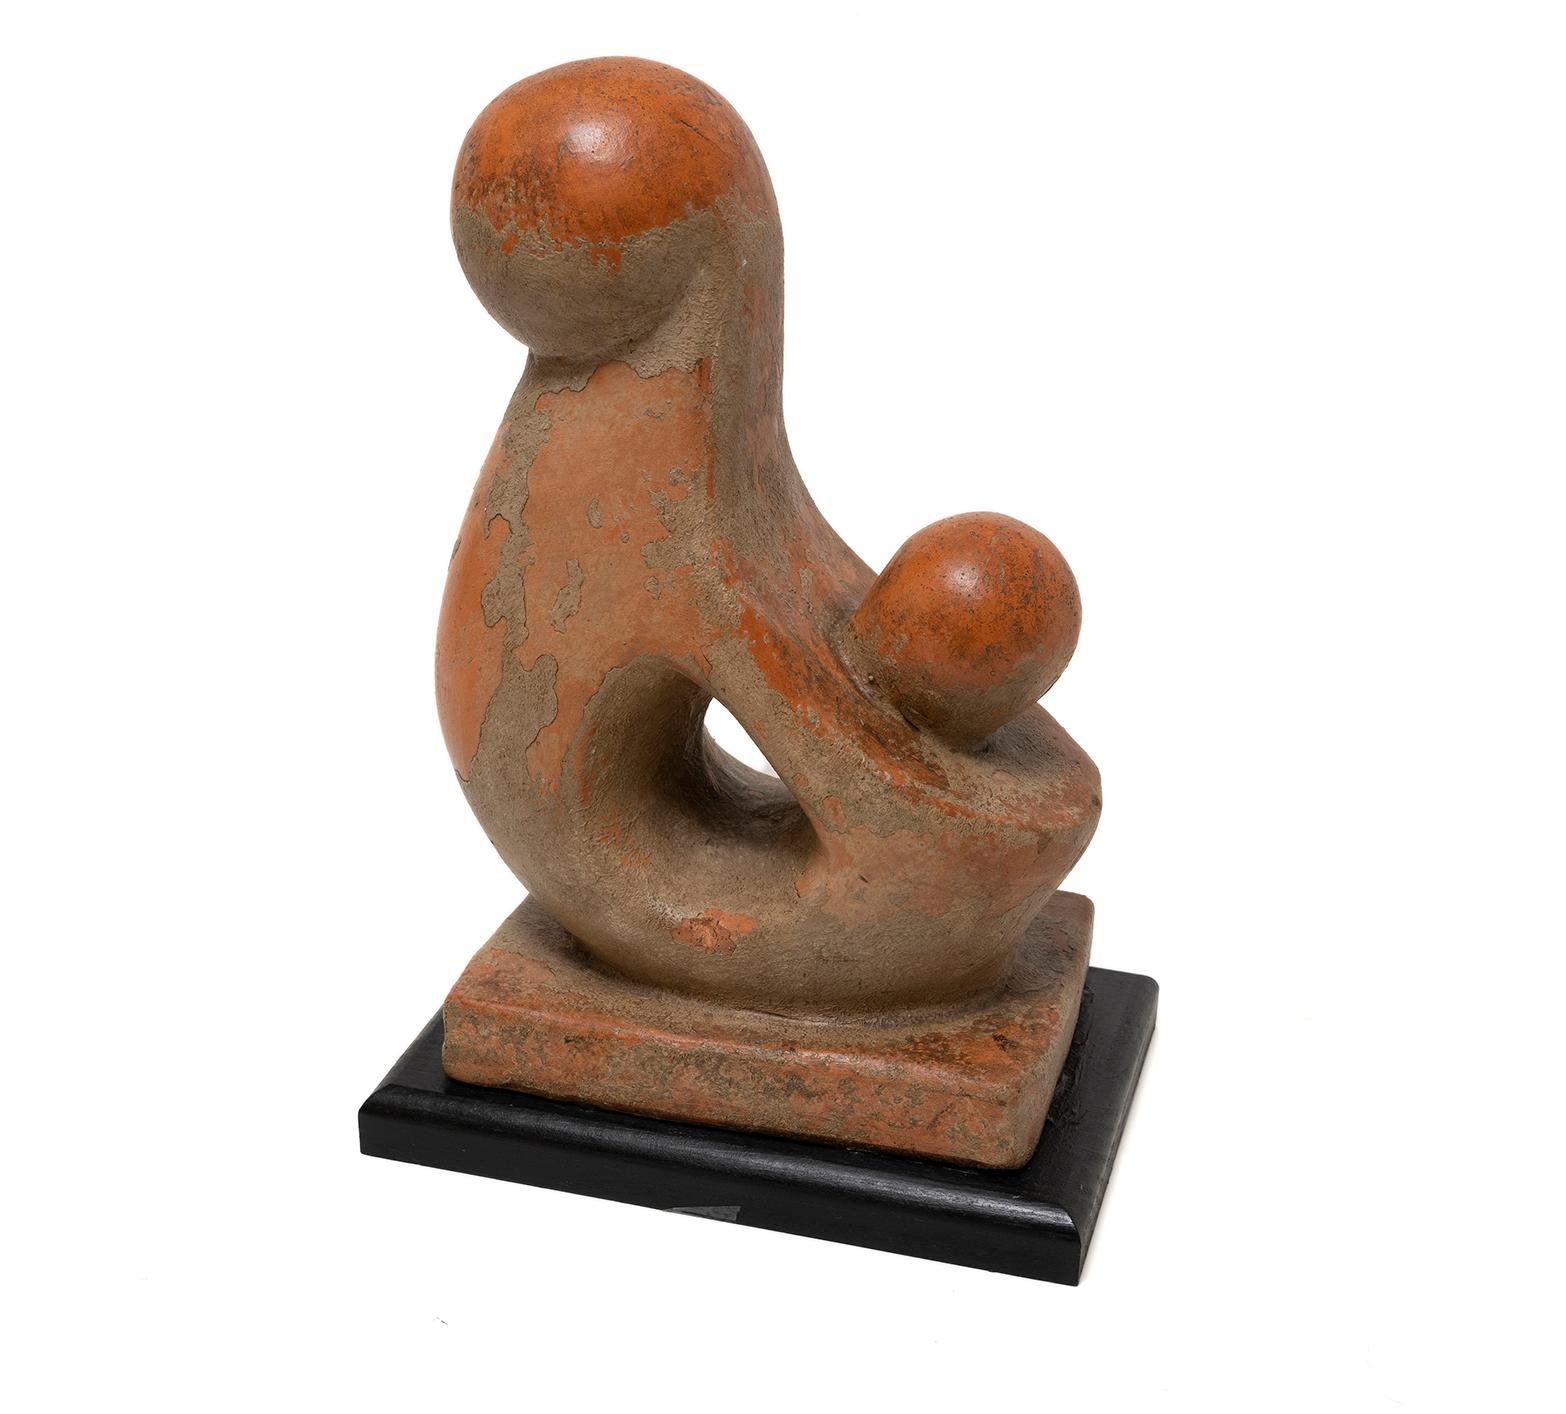 A 39cm., 15 1/4“ high, modernist, biomorphic, terracotta sculpture of a Mother & Child, mid-20th century.  Conceived with a stone finish which has partially worn away over time.  Possibly originally outside or an architectural embellishment.
Artist